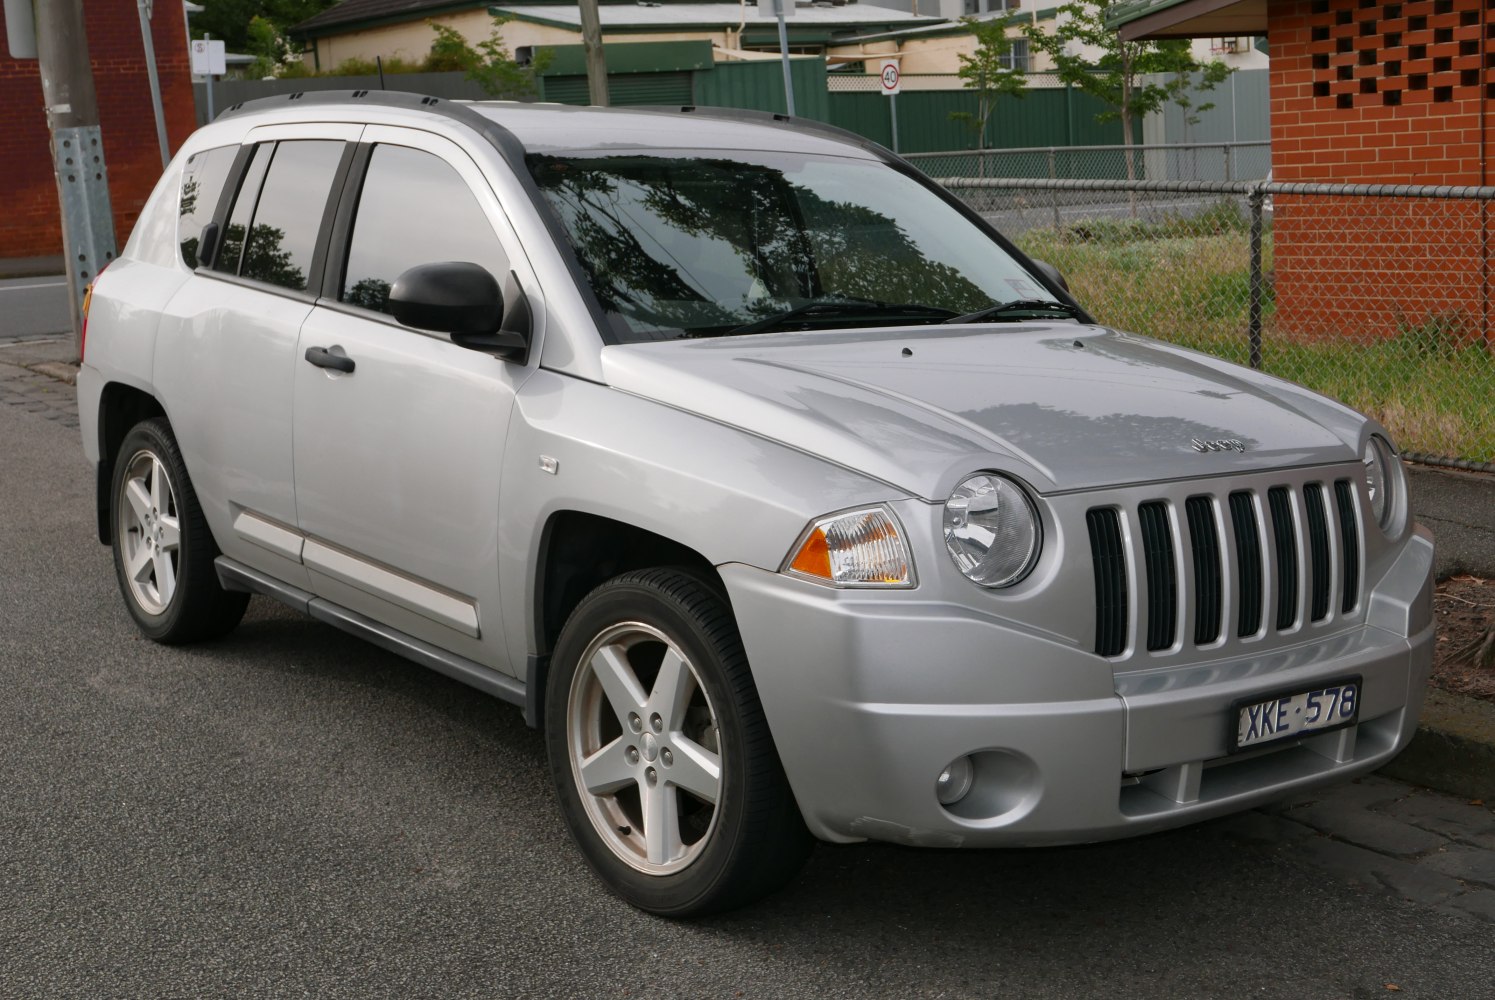 https://totalrenting.es/wp-content/uploads/2022/10/jeep-compass-i-2007-2-4-170-cv-4x4-suv.png